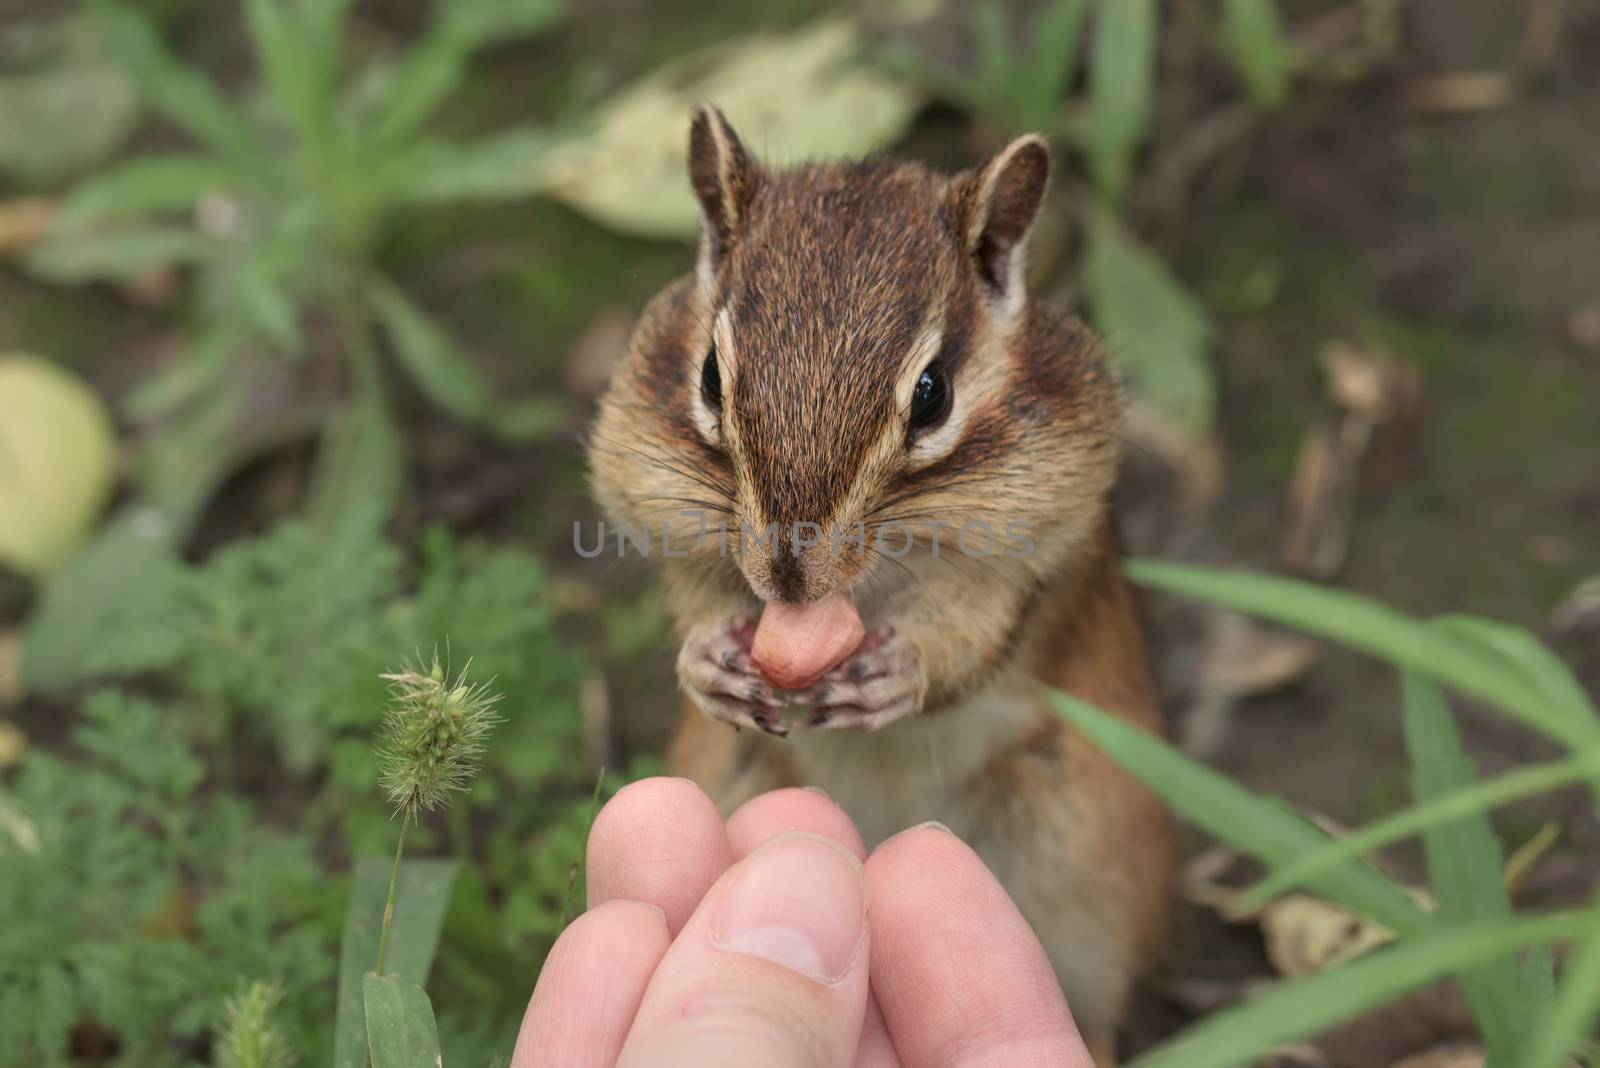 Chipmunk in nature. Chipmunk is stuffing food into mouth